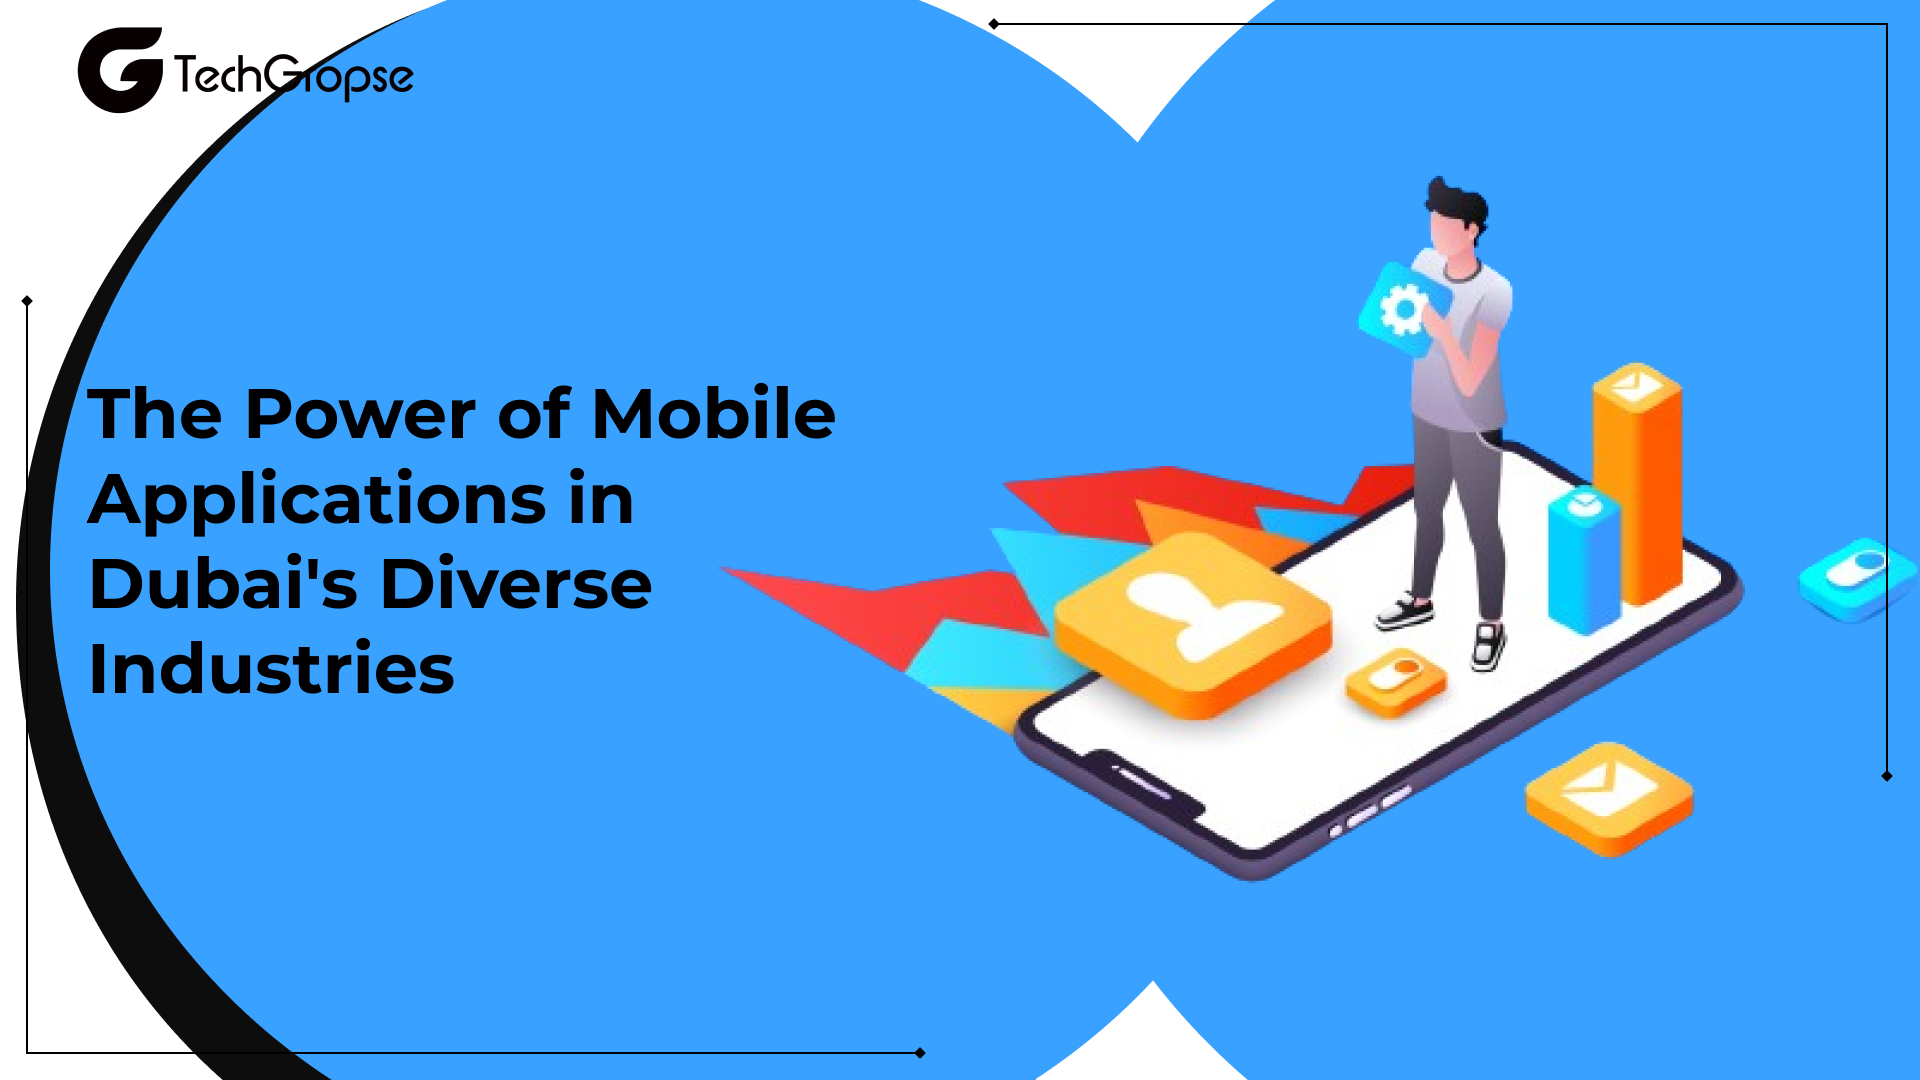 The Power of Mobile Applications in Dubai's Diverse Industries